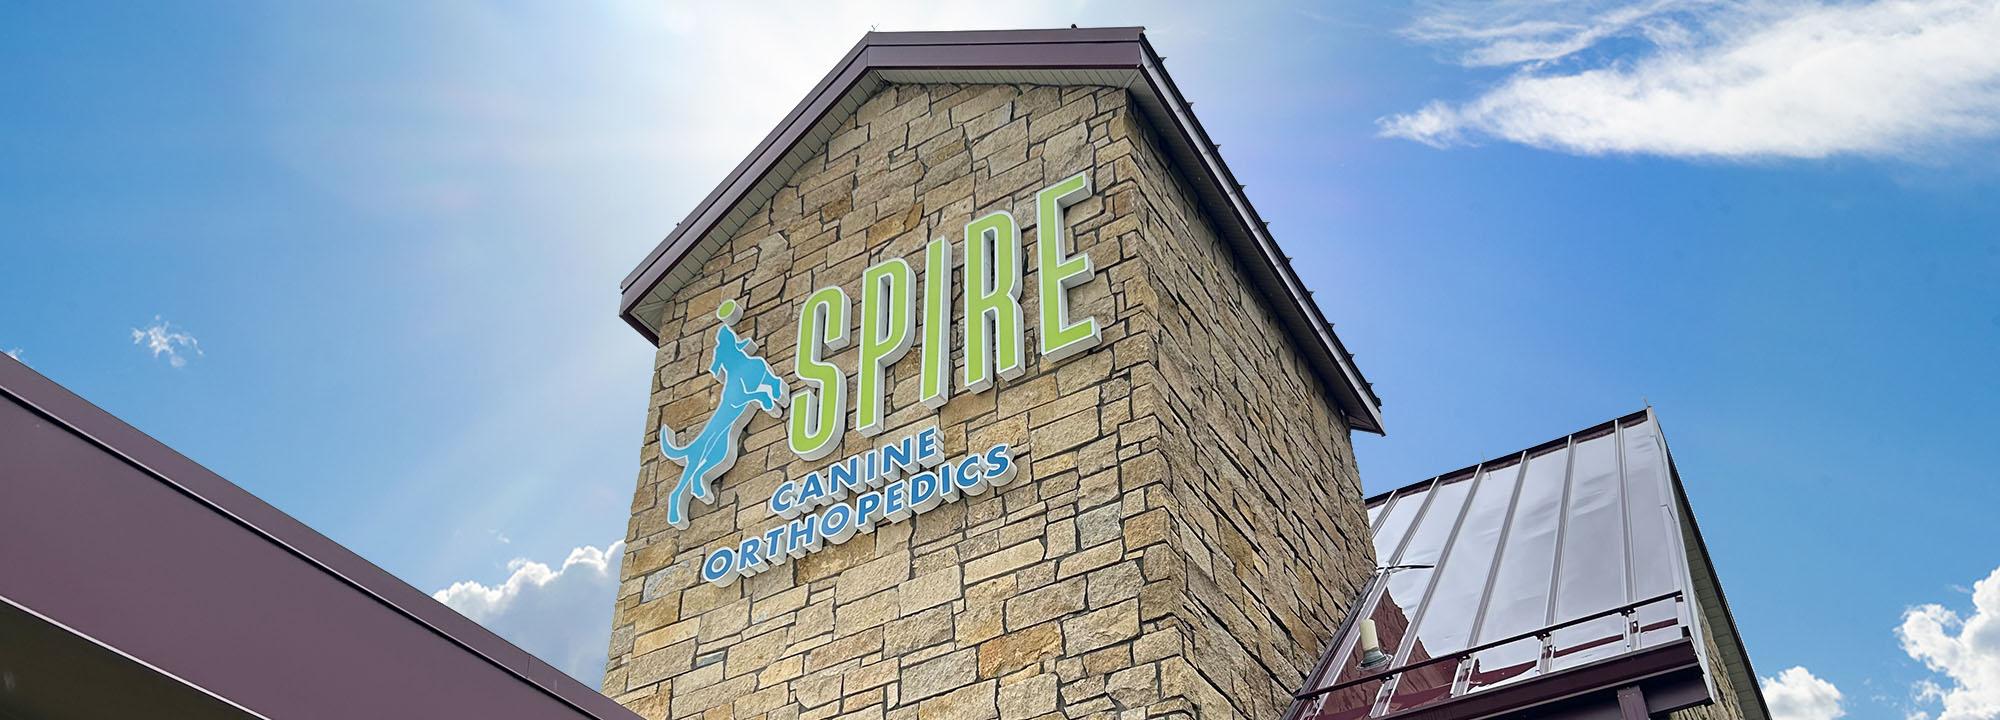 Spire building with logo